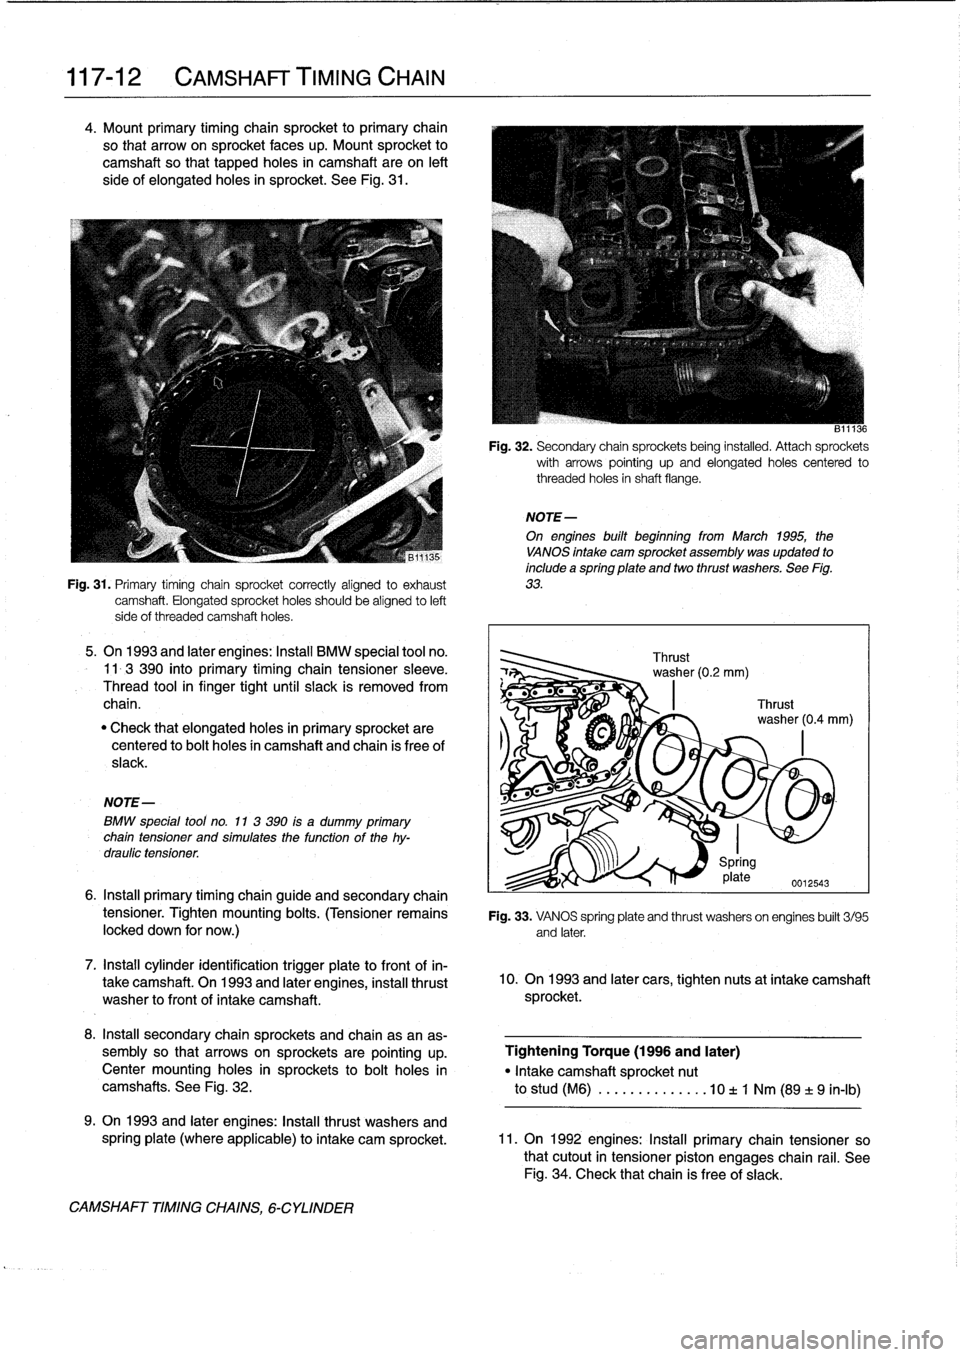 BMW 318i 1996 E36 Workshop Manual 
117-
1
2

	

CAMSHAFT
TIMING
CHAIN

4
.
Mount
primary
timing
chain
sprocket
to
primary
chain

so
that
arrowon
sprocket
faces
up
.
Mount
sprocket
to

camshaftso
that
tapped
holes
in
camshaftare
on
lef